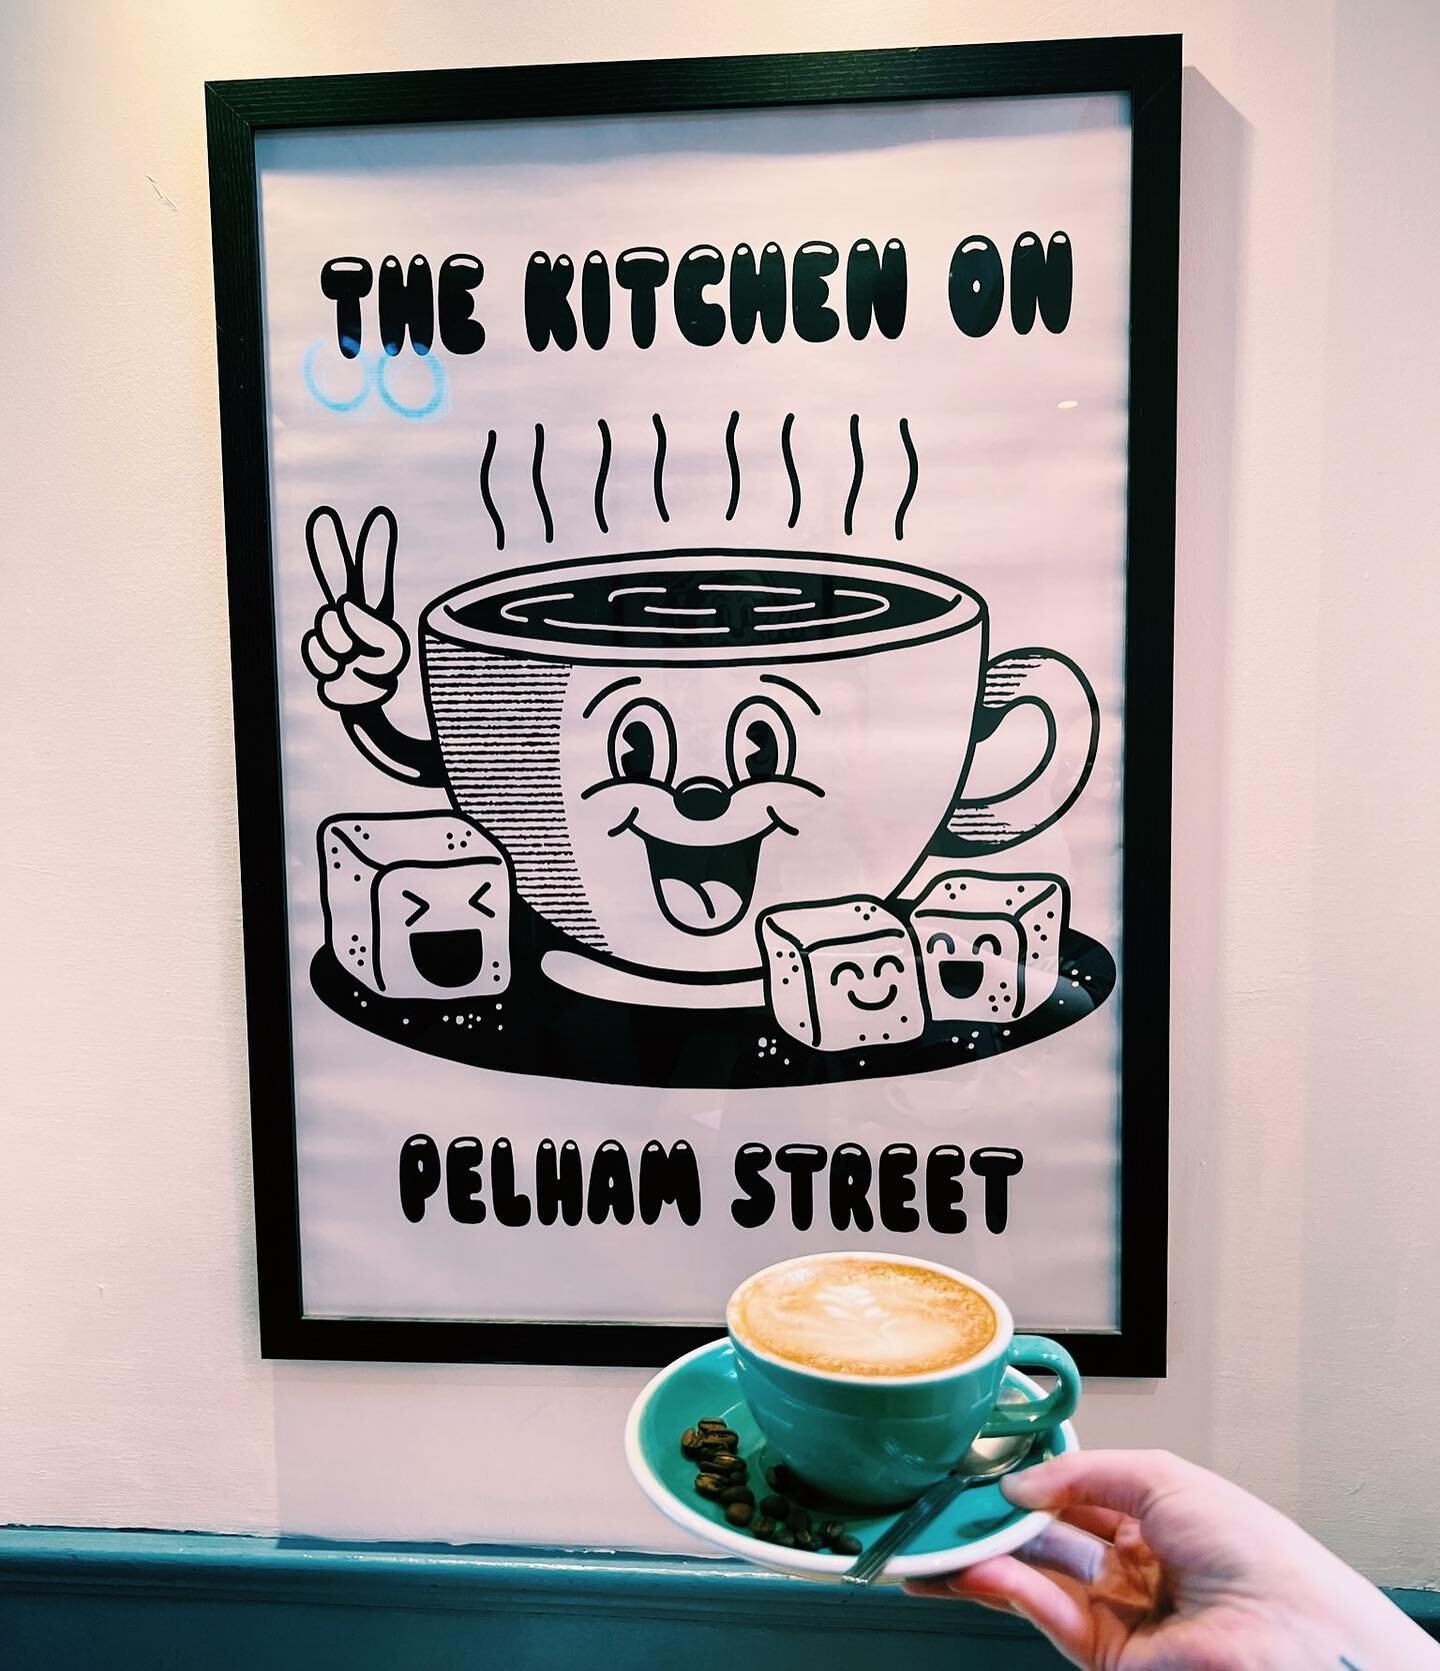 it&rsquo;s an exciting time here at @pelhamstreetkitchen : new menu items coming soon, saying goodbye to some angels &amp; hello to new ones, summer cakes coming. thank you to everyone for keeping us busy. &amp; thank you to all the staff for being a